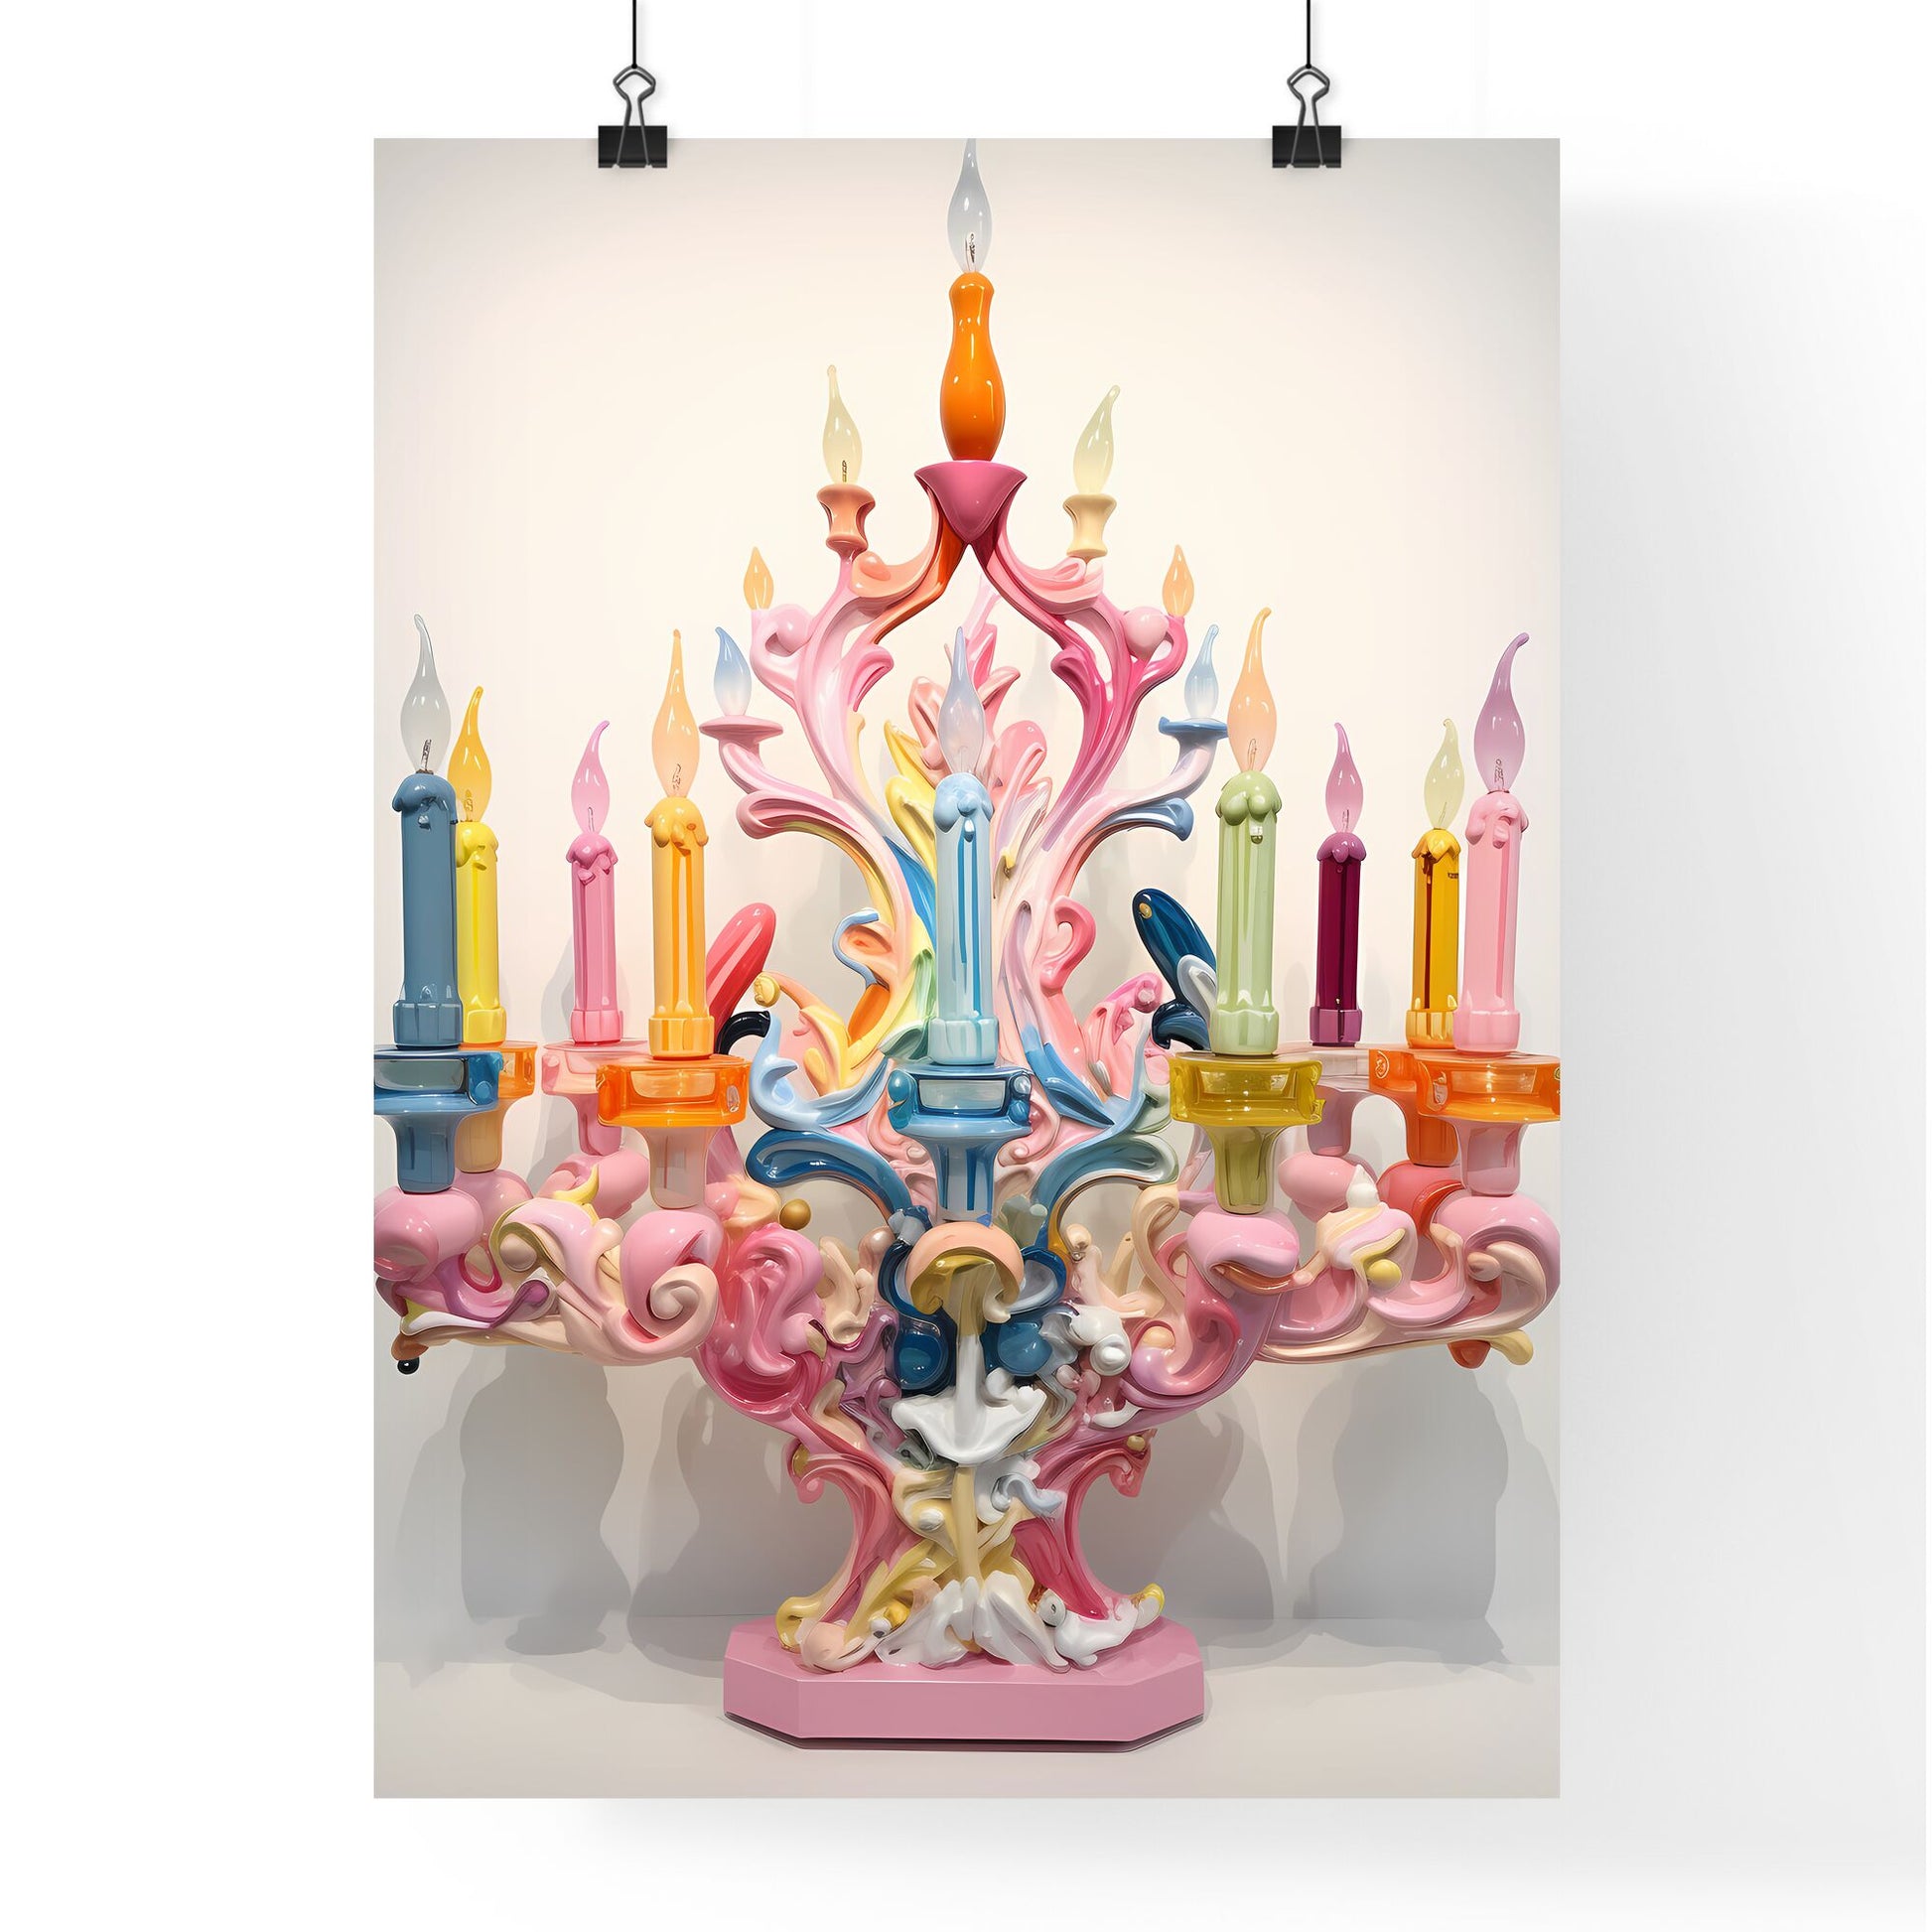 A Poster of a colorful menorah painted on white - A Colorful Candle Holder With Candles Default Title